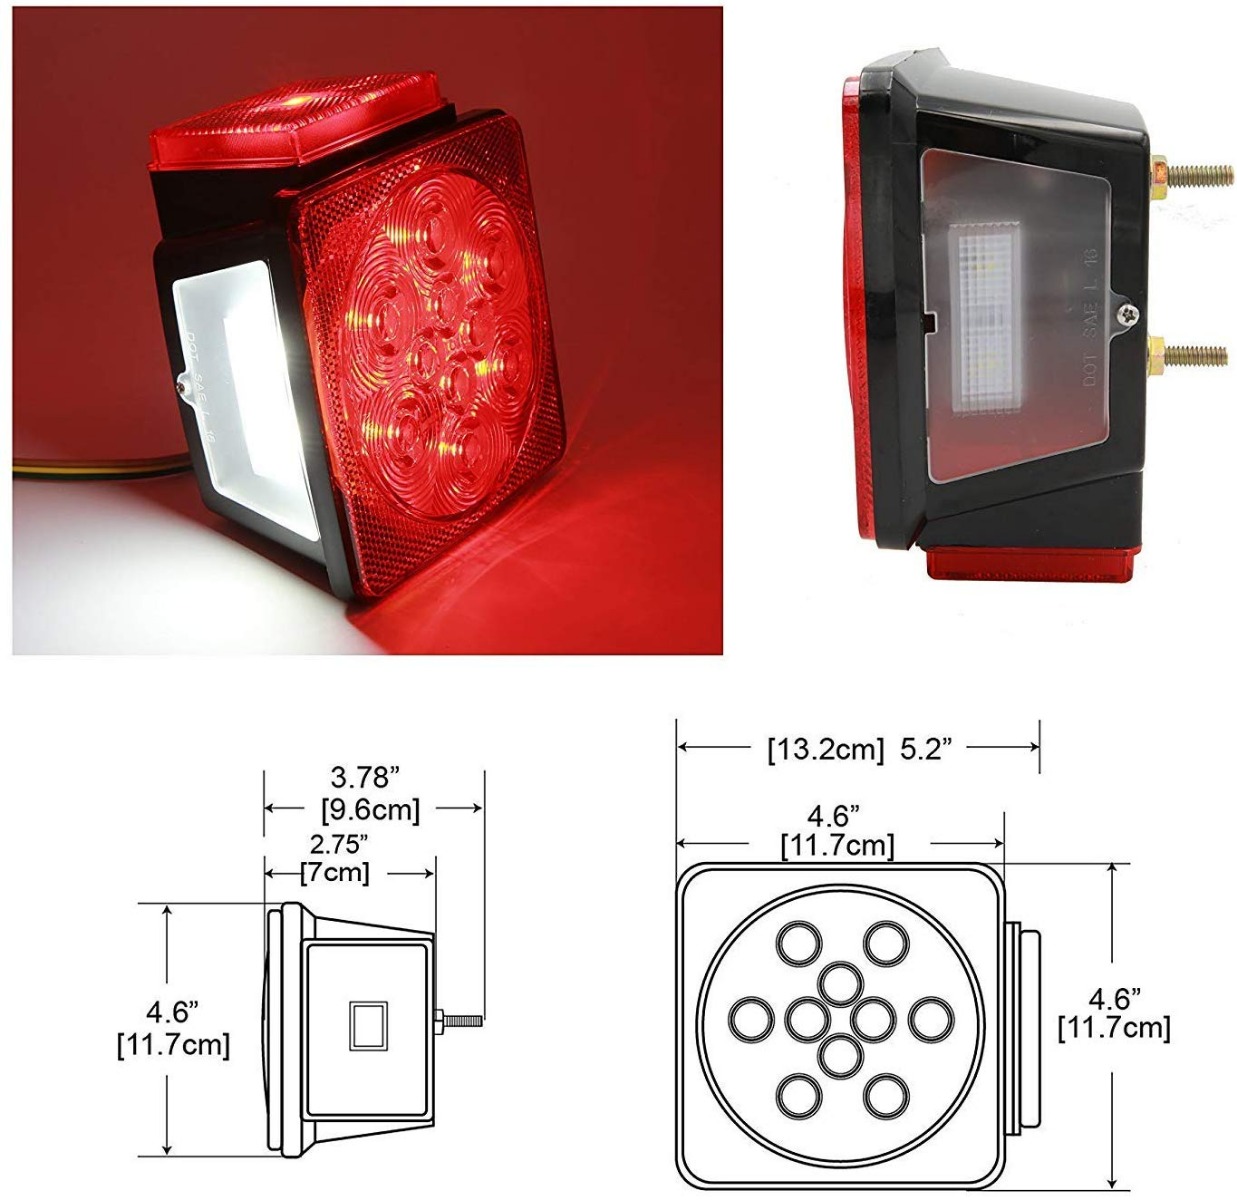 Deluxe 12V LED Submersible Rear Trailer Light Kit for trailers under 80 inches in width-8061